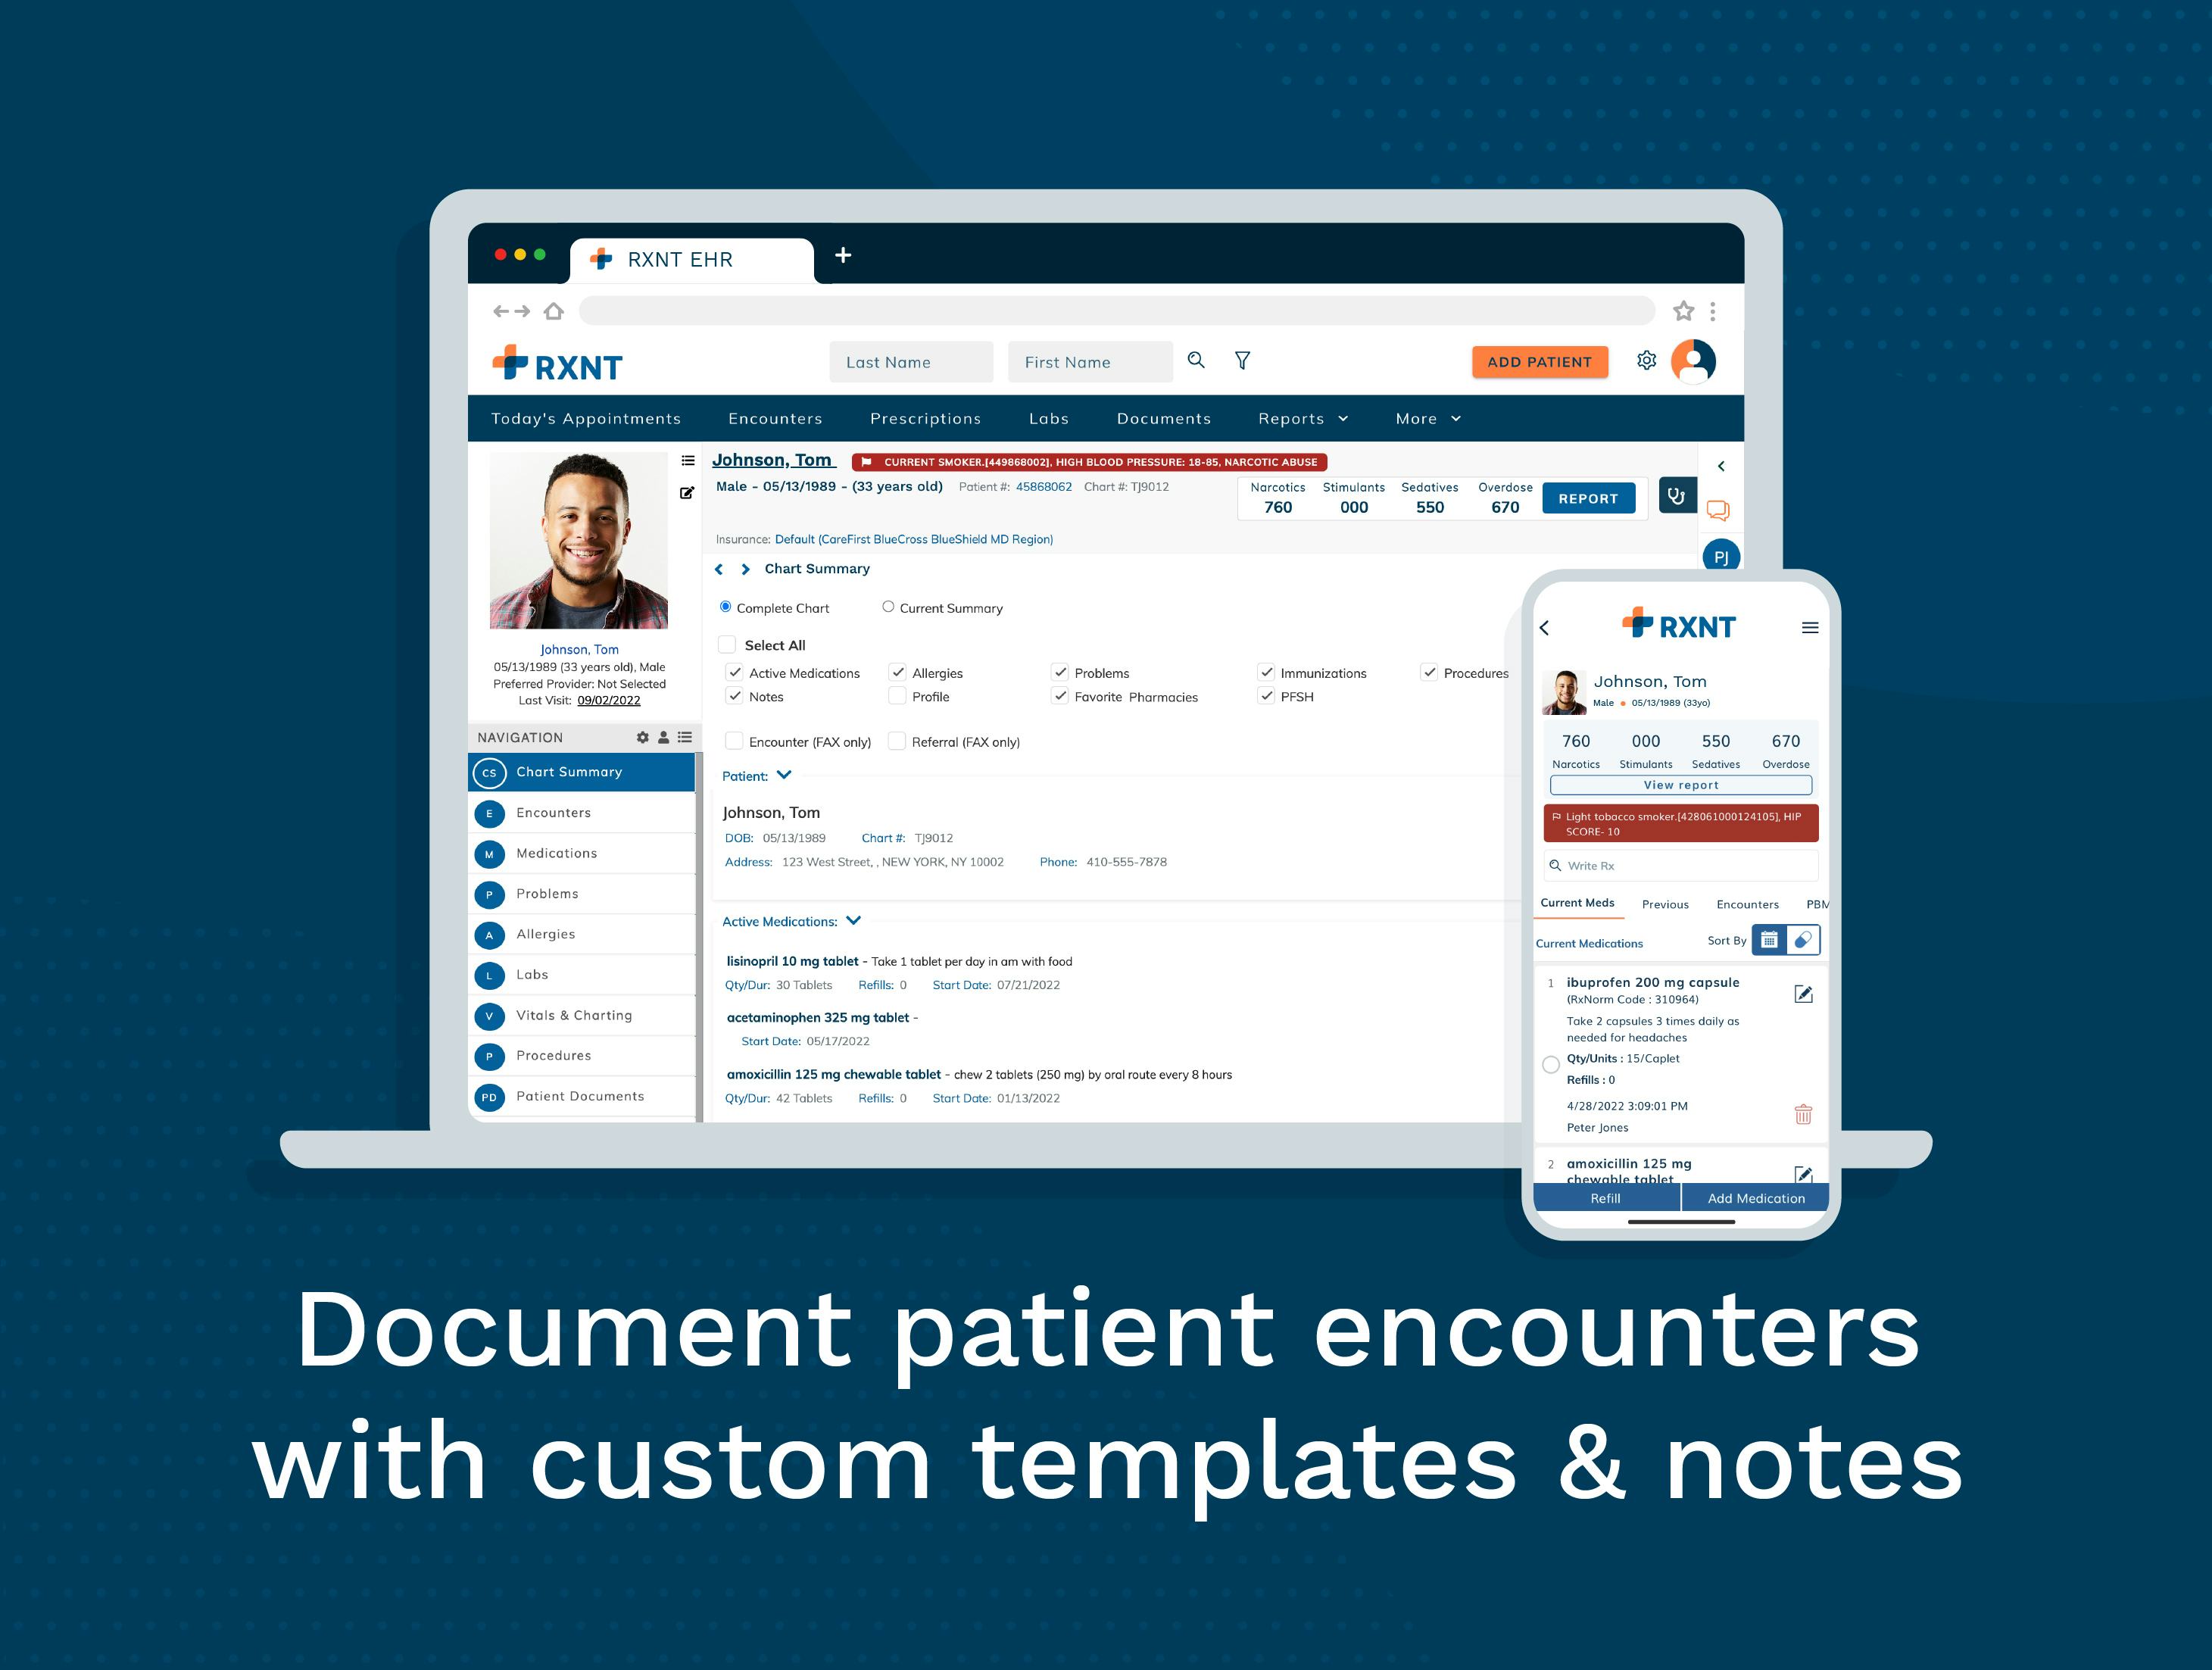 RXNT Software - RXNT Electronic Health Records (EHR/EMR) Software. Manage your patient's complete health information, with custom encounters, notes & forms, past medications, allergies, labs, and more. Available for desktop, tablet, & mobile (iOS & Android).